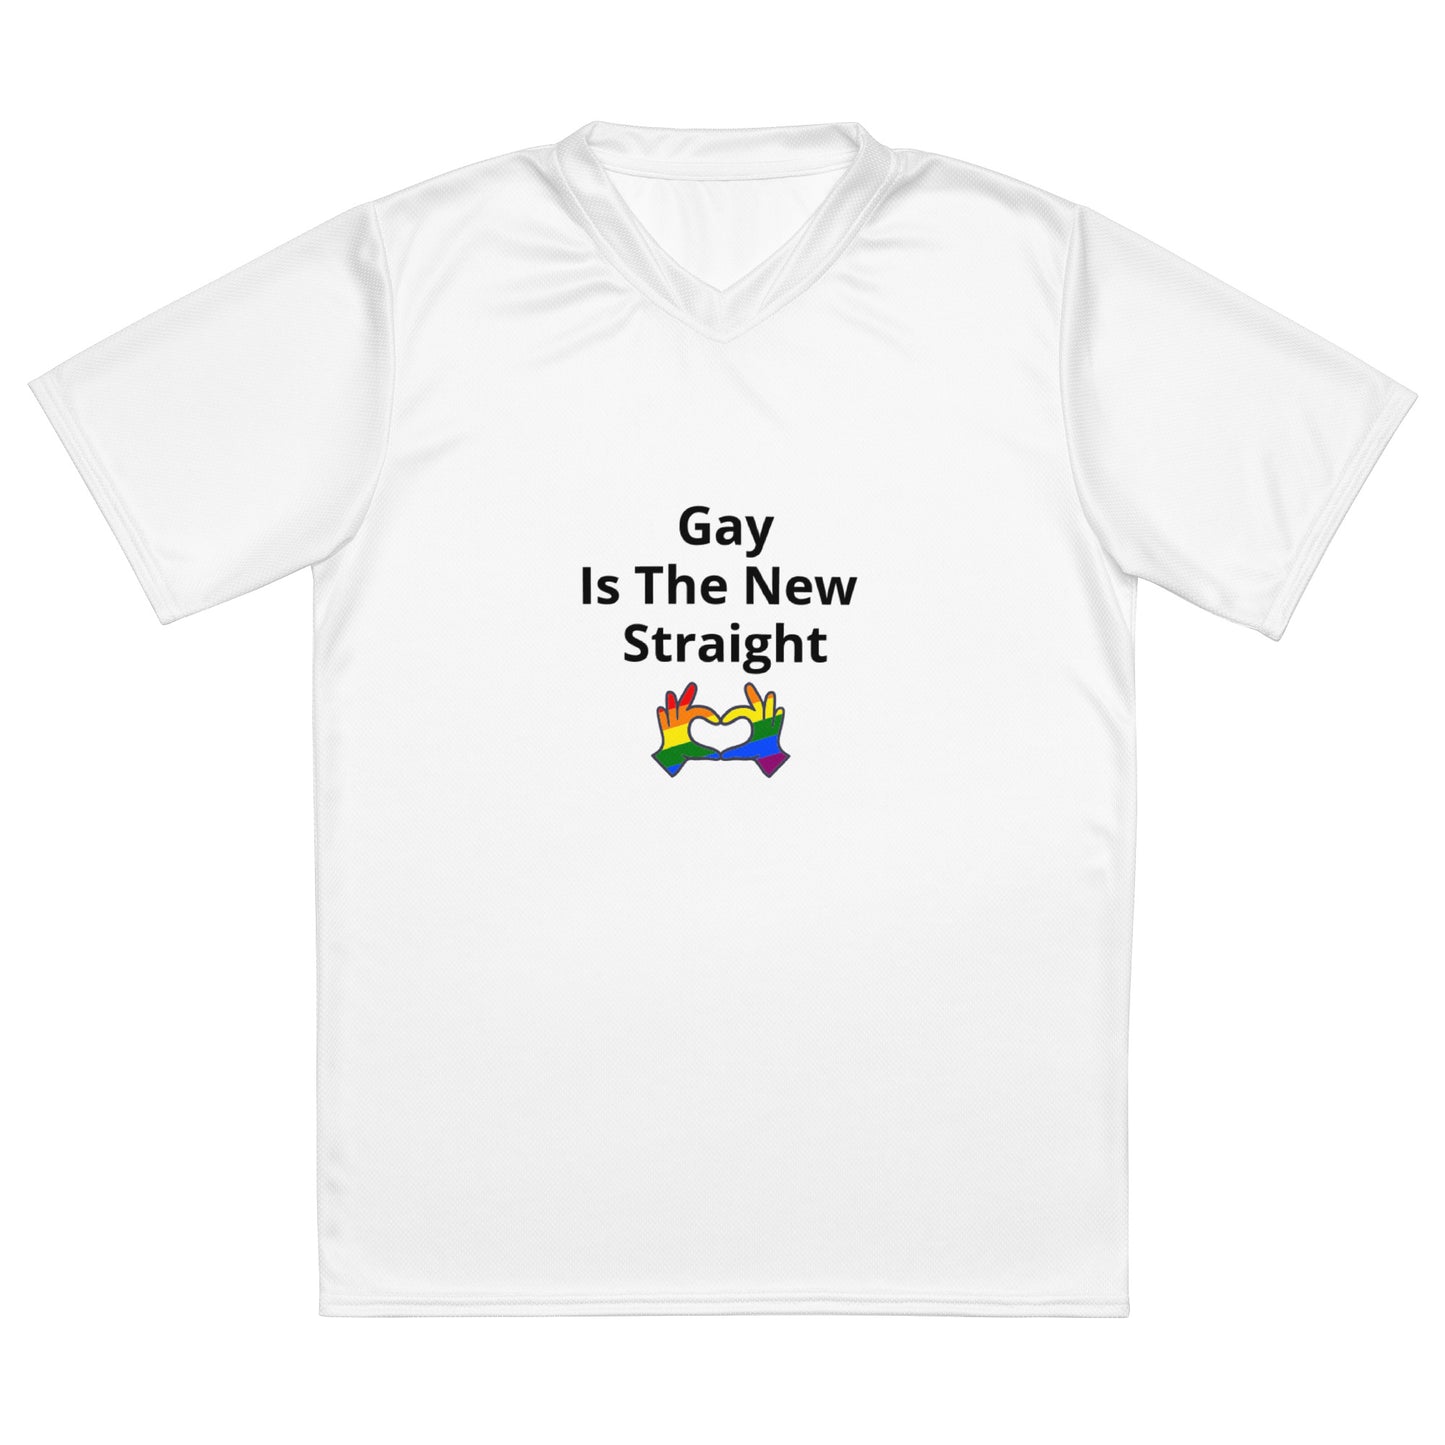 Gay Is The New Straight Lettered Recycled unisex sports jersey